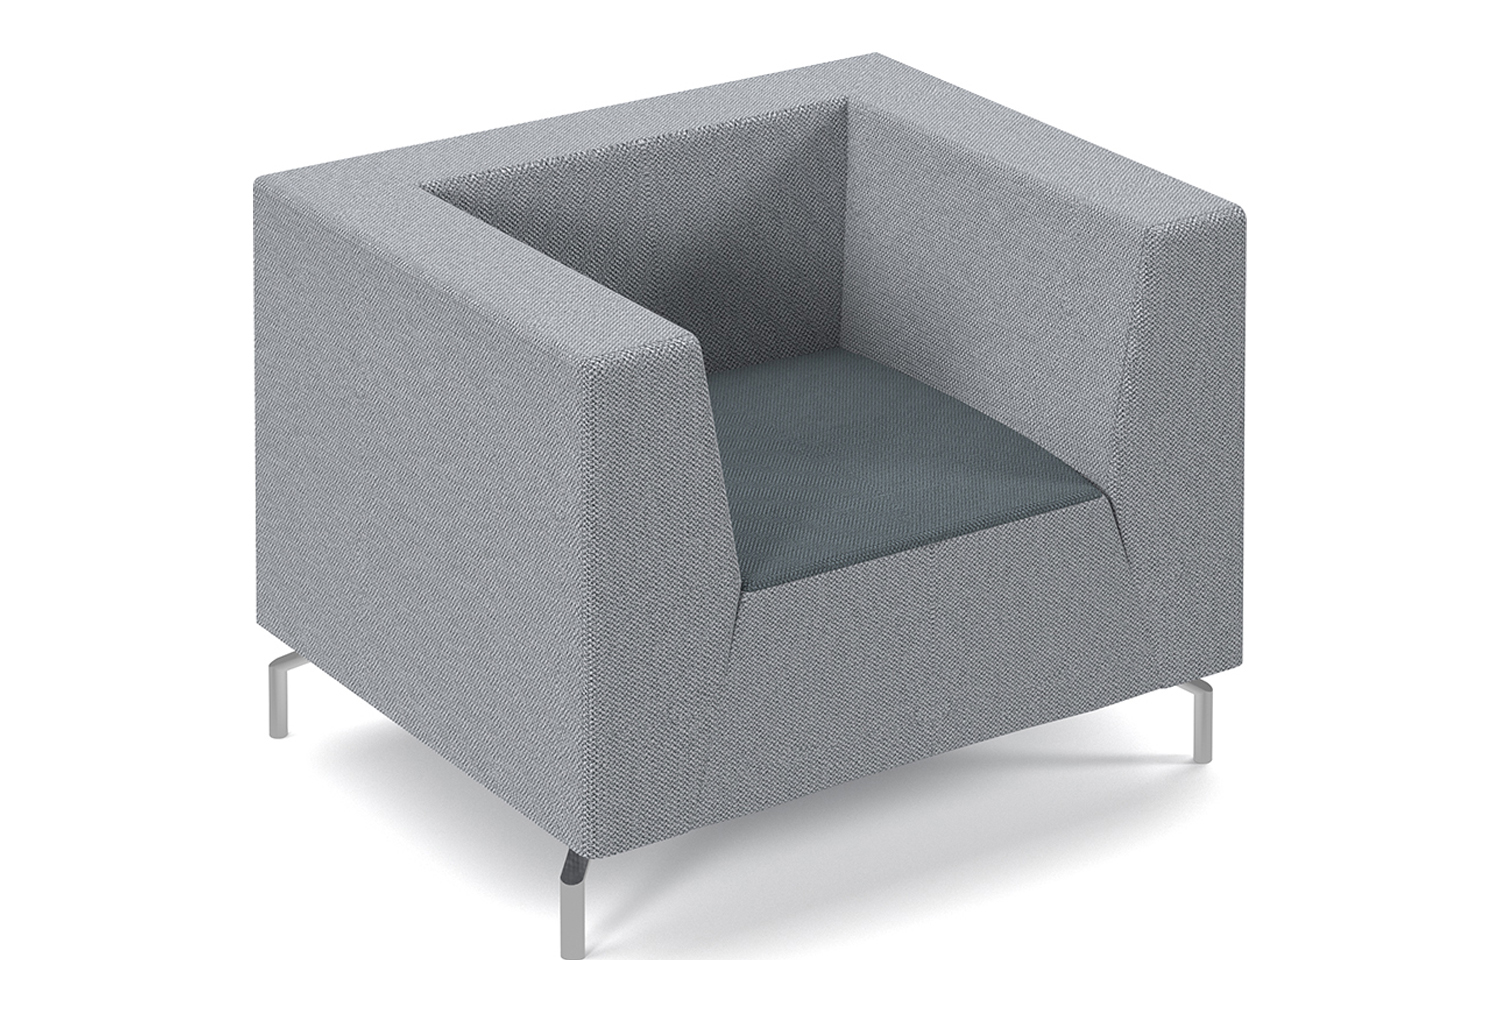 Plato 2 Tone Fabric Low Armchair, Elapse Grey Seat/Late Grey Back